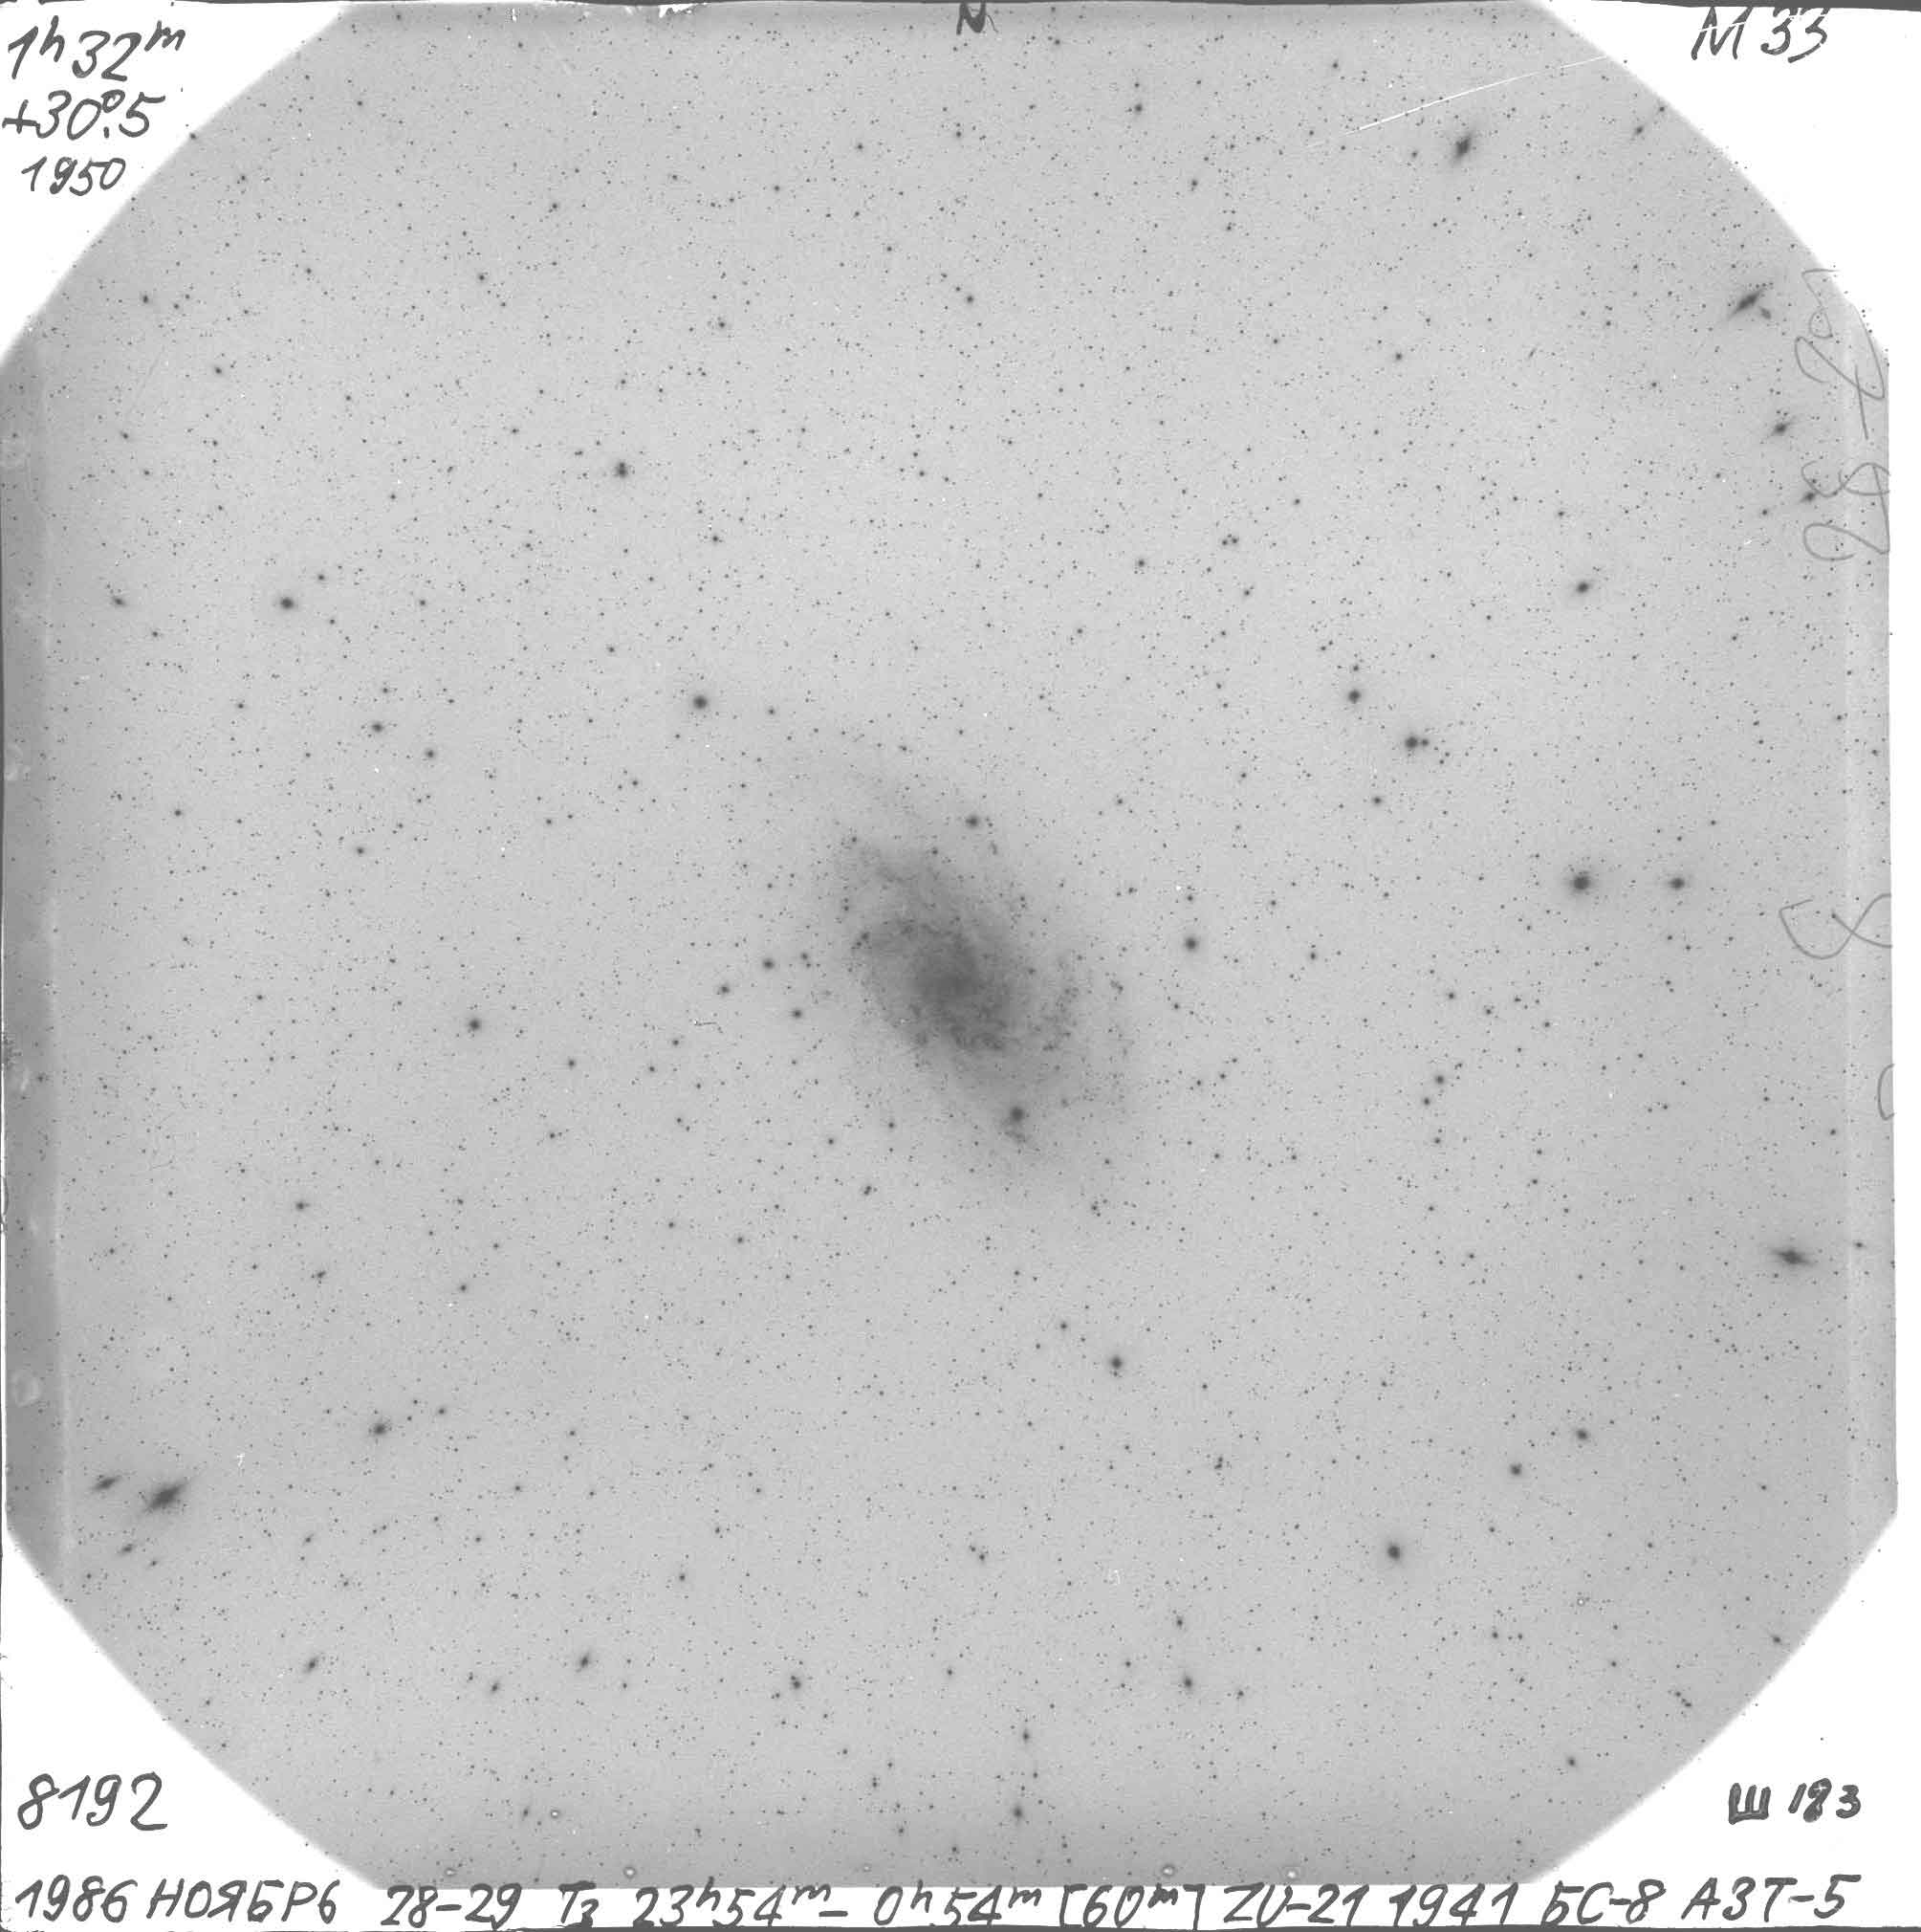 A scanned plate of the galaxy M33 from the 50-cm Maksutov telescope (preliminary scann).